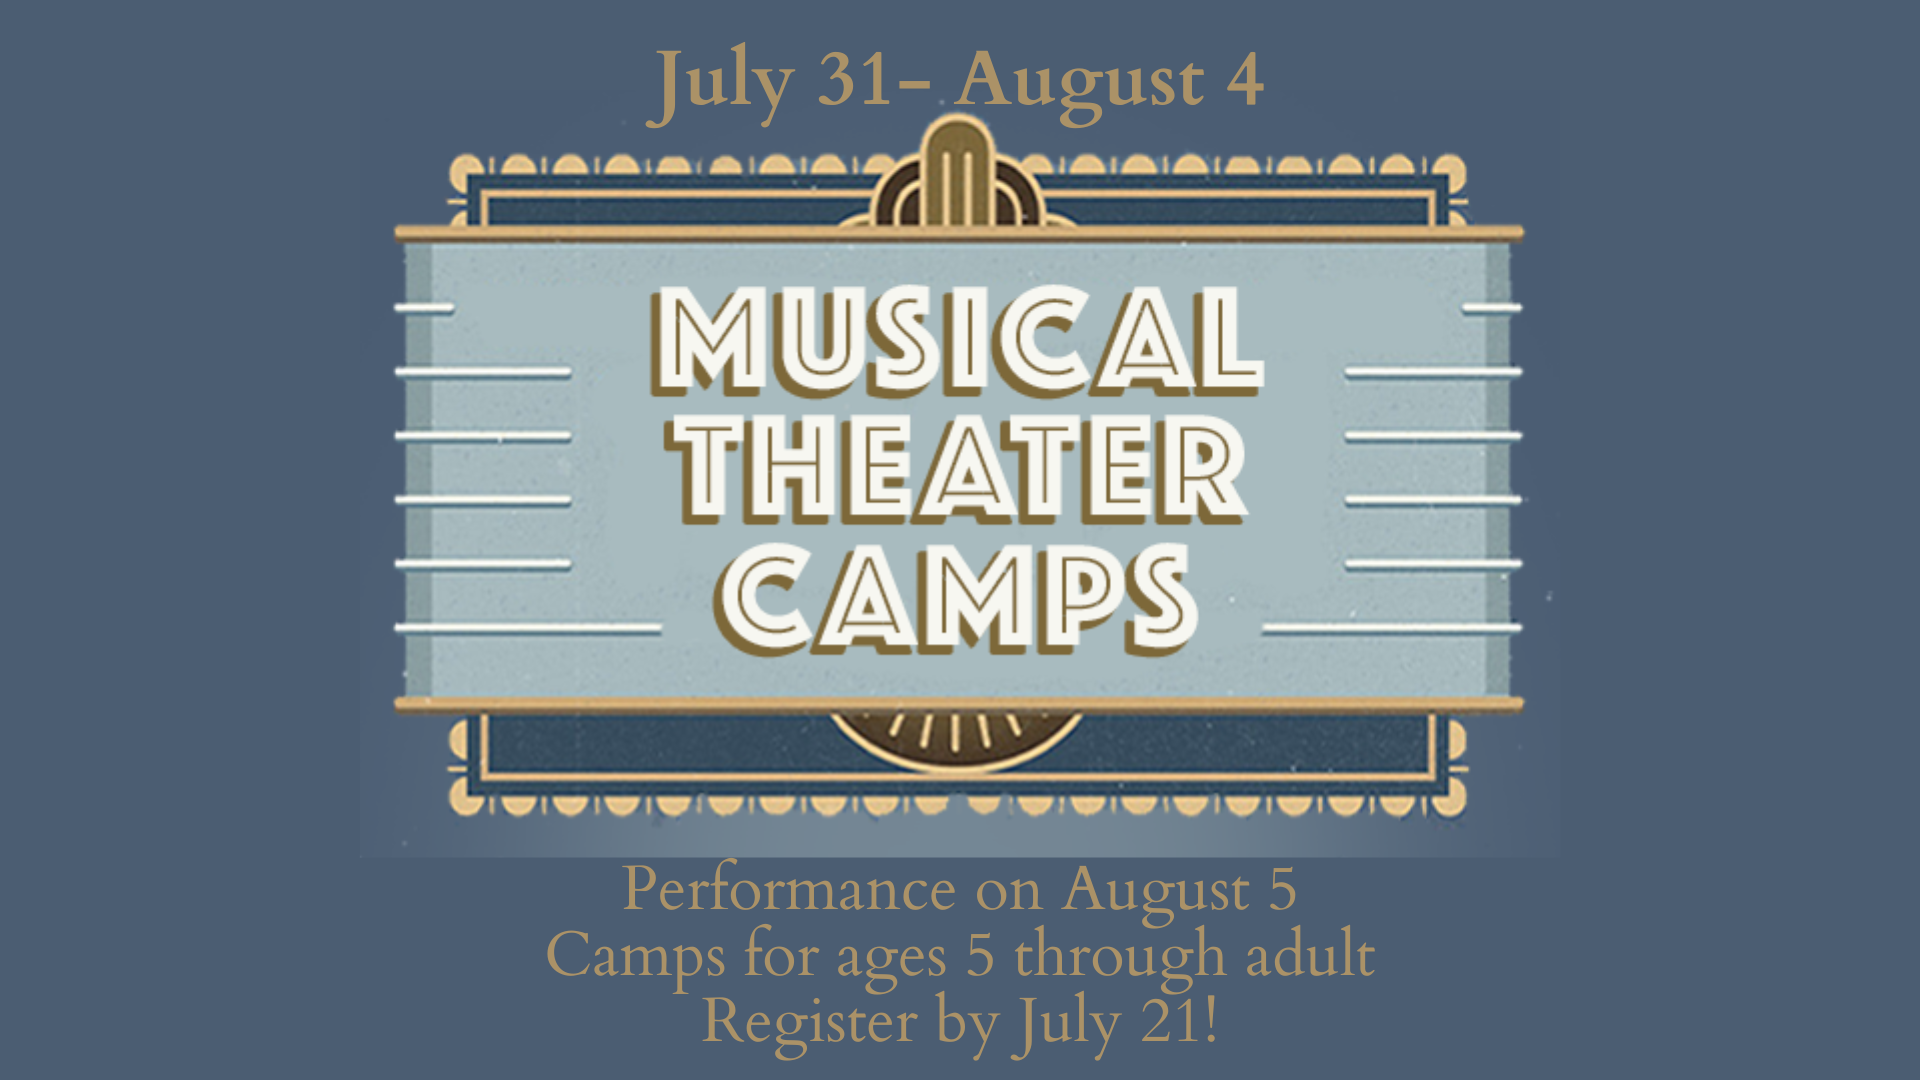 July 31- August 4 Performance on August 5 Camps for ages 5 through adult Register by July 17! (Prese image